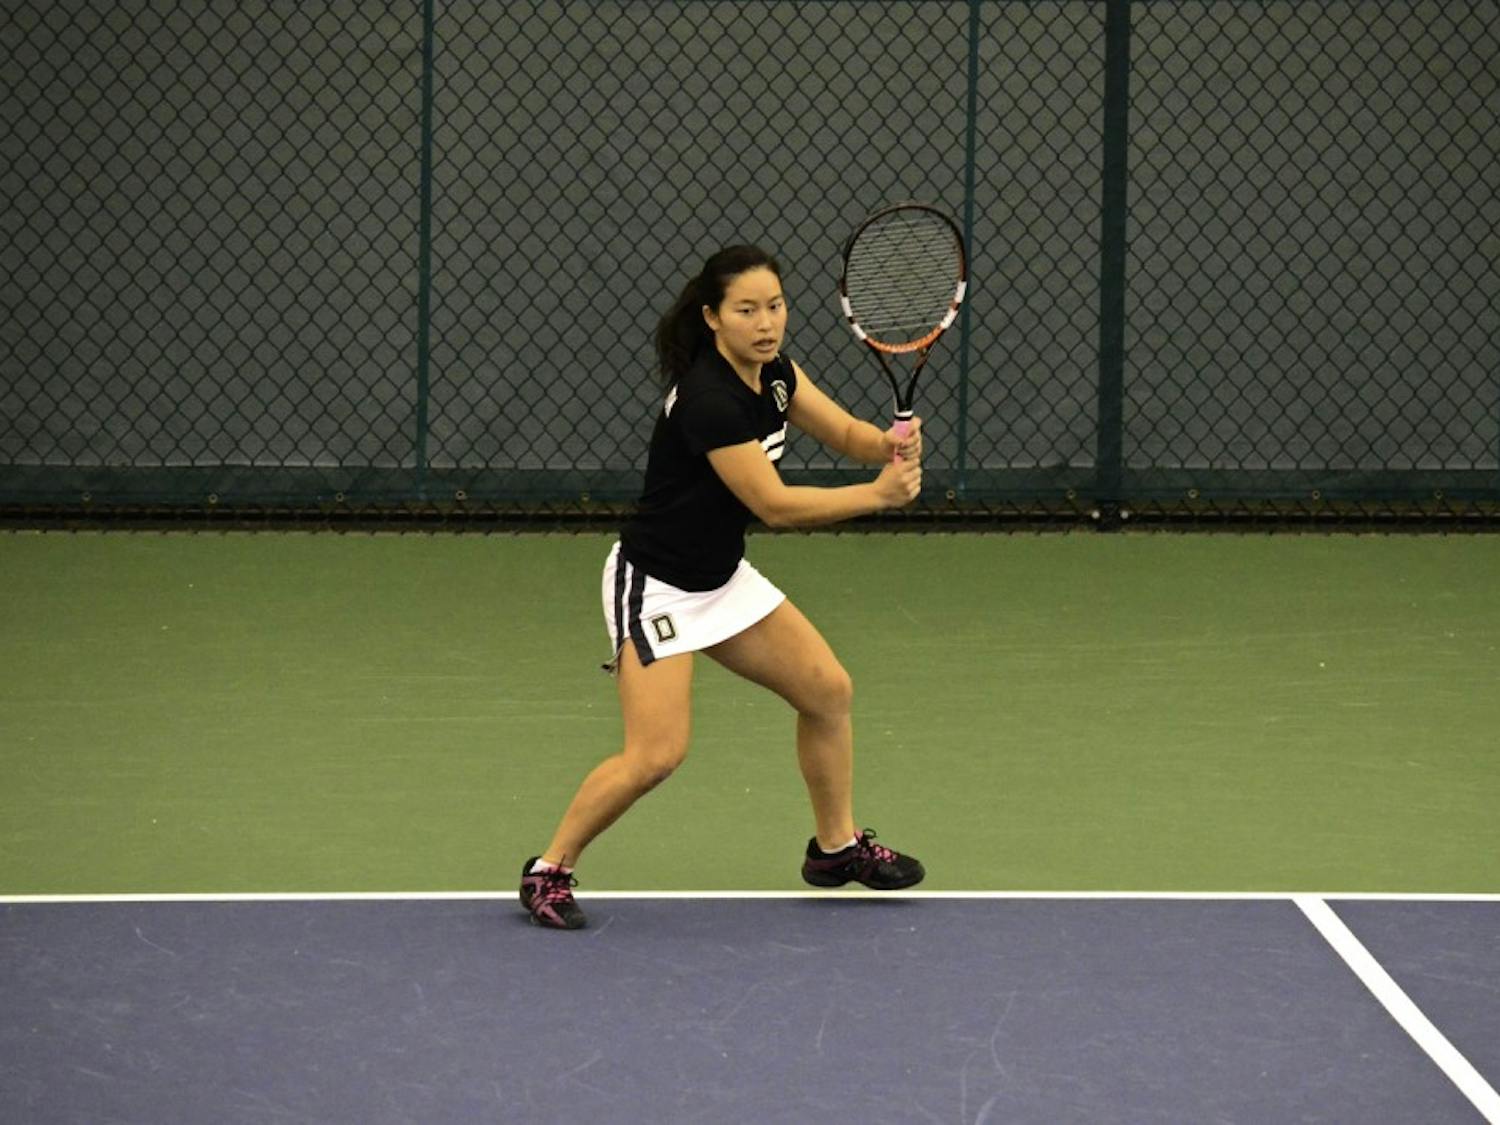 Akiko Okuda ’15 went 2-1 over the weekend, part of Dartmouth’s dominating performance at the Big Green Invite.